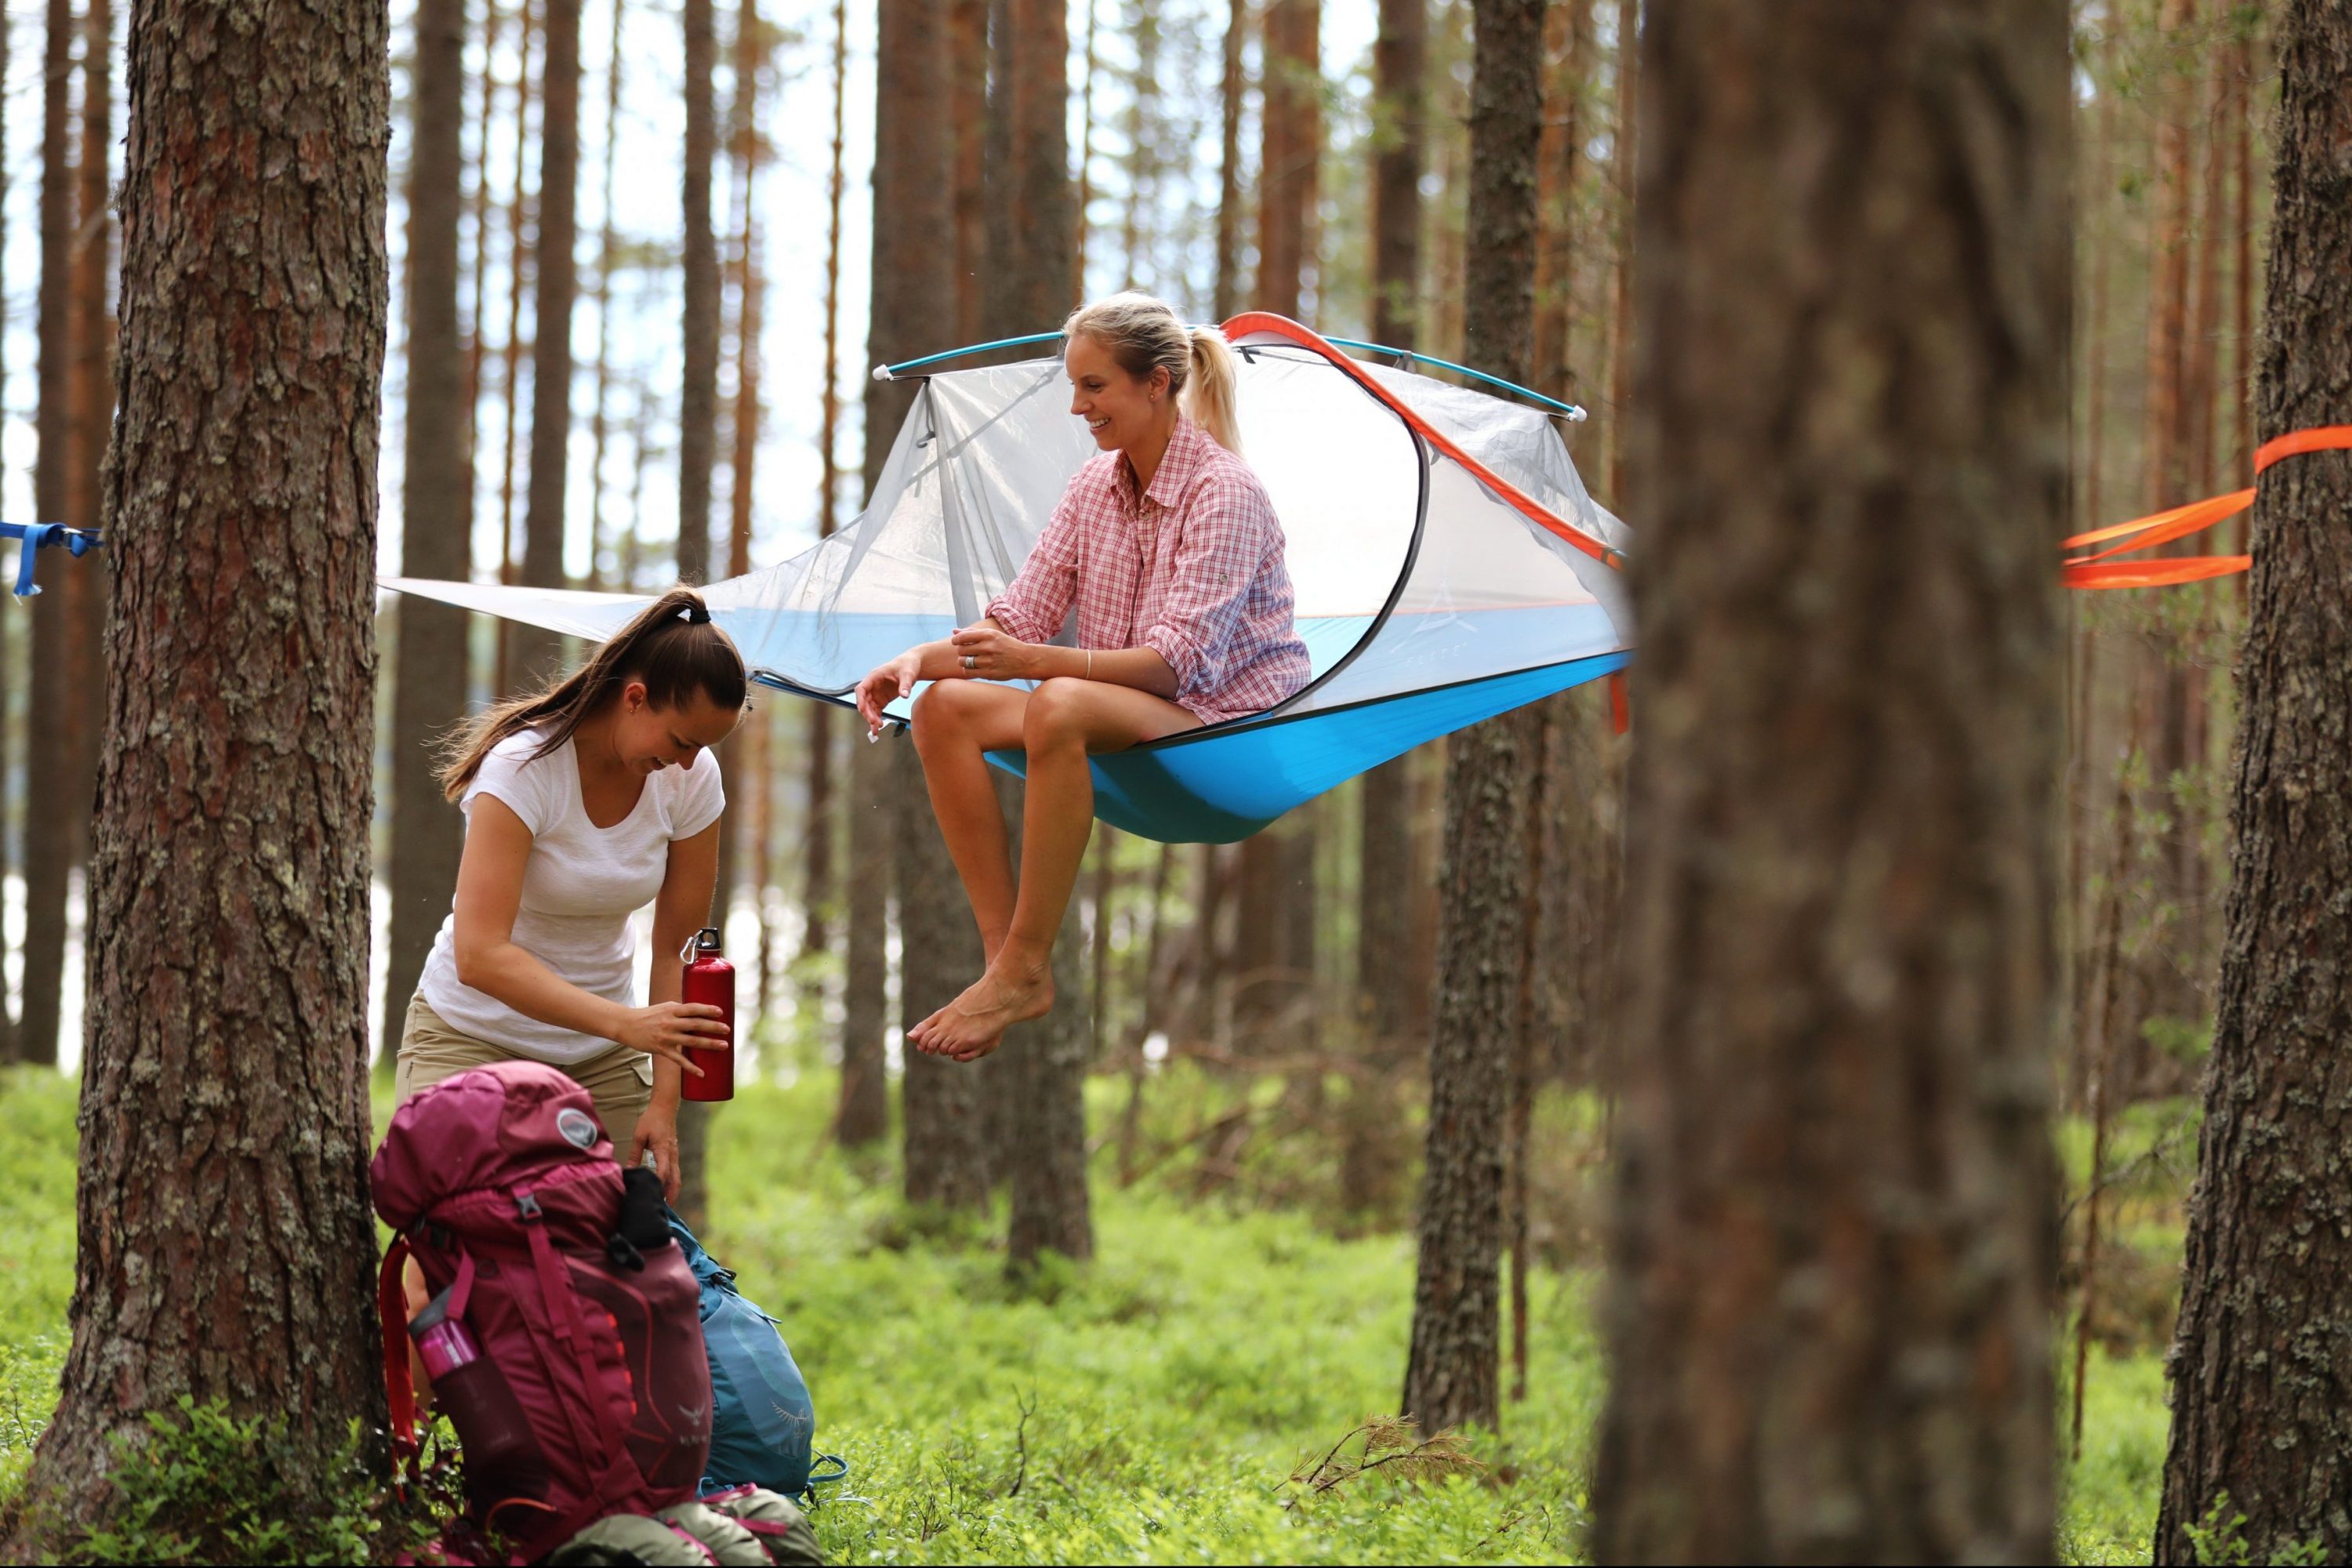 Hikers with a hammock